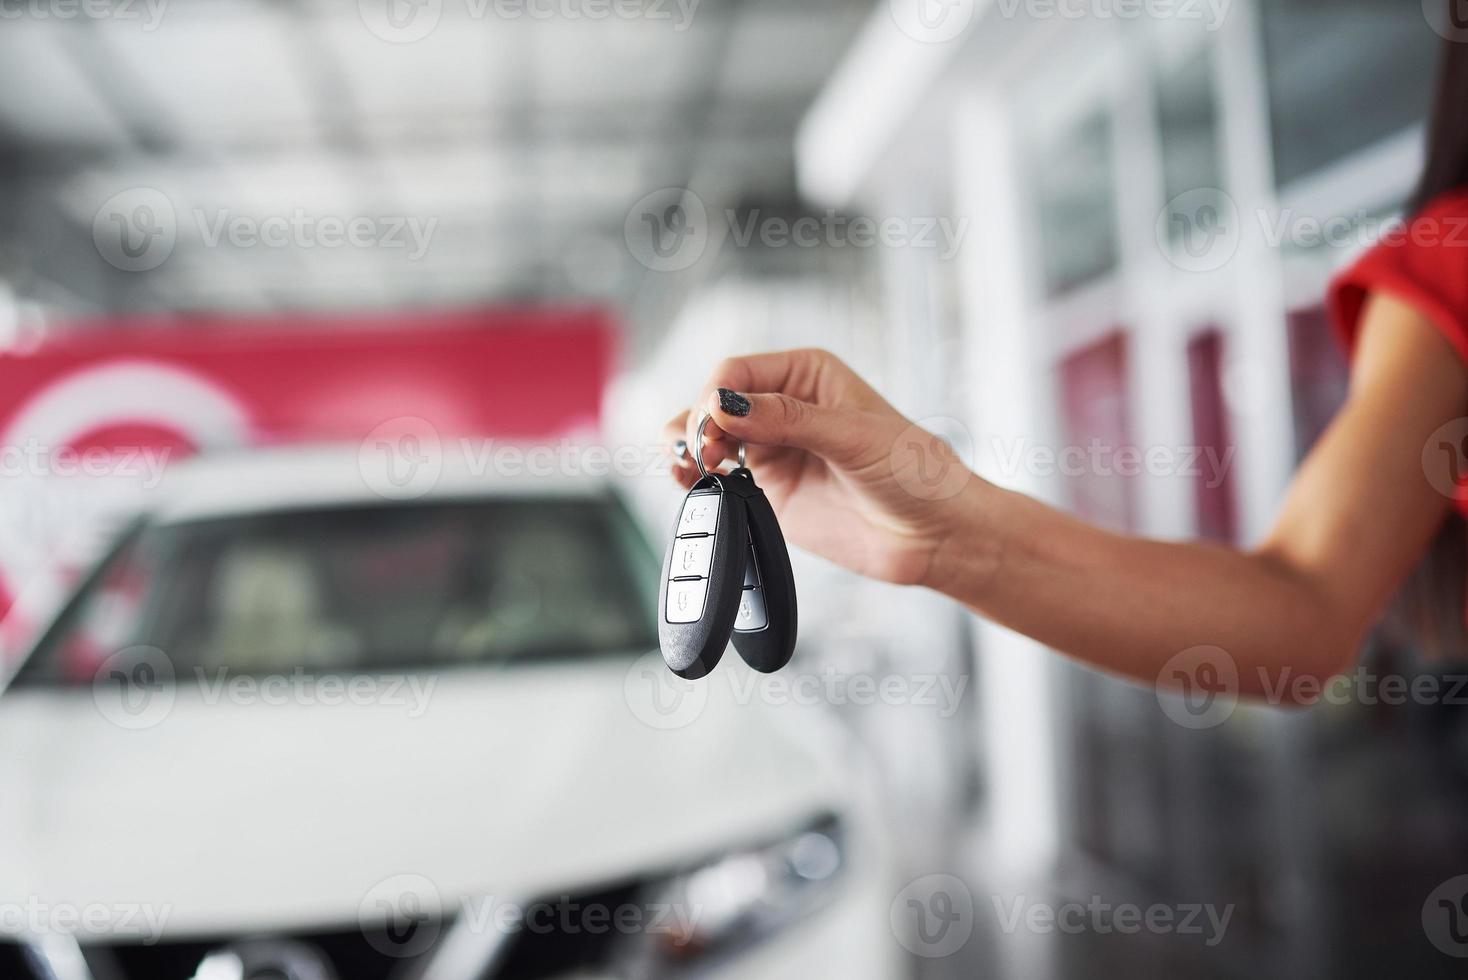 Passing car keys. Cropped closeup of a car dealer holding out car keys to the camera copyspace car dealership salon manager salesman selling buying giving owner profession purchase vehicle concept photo